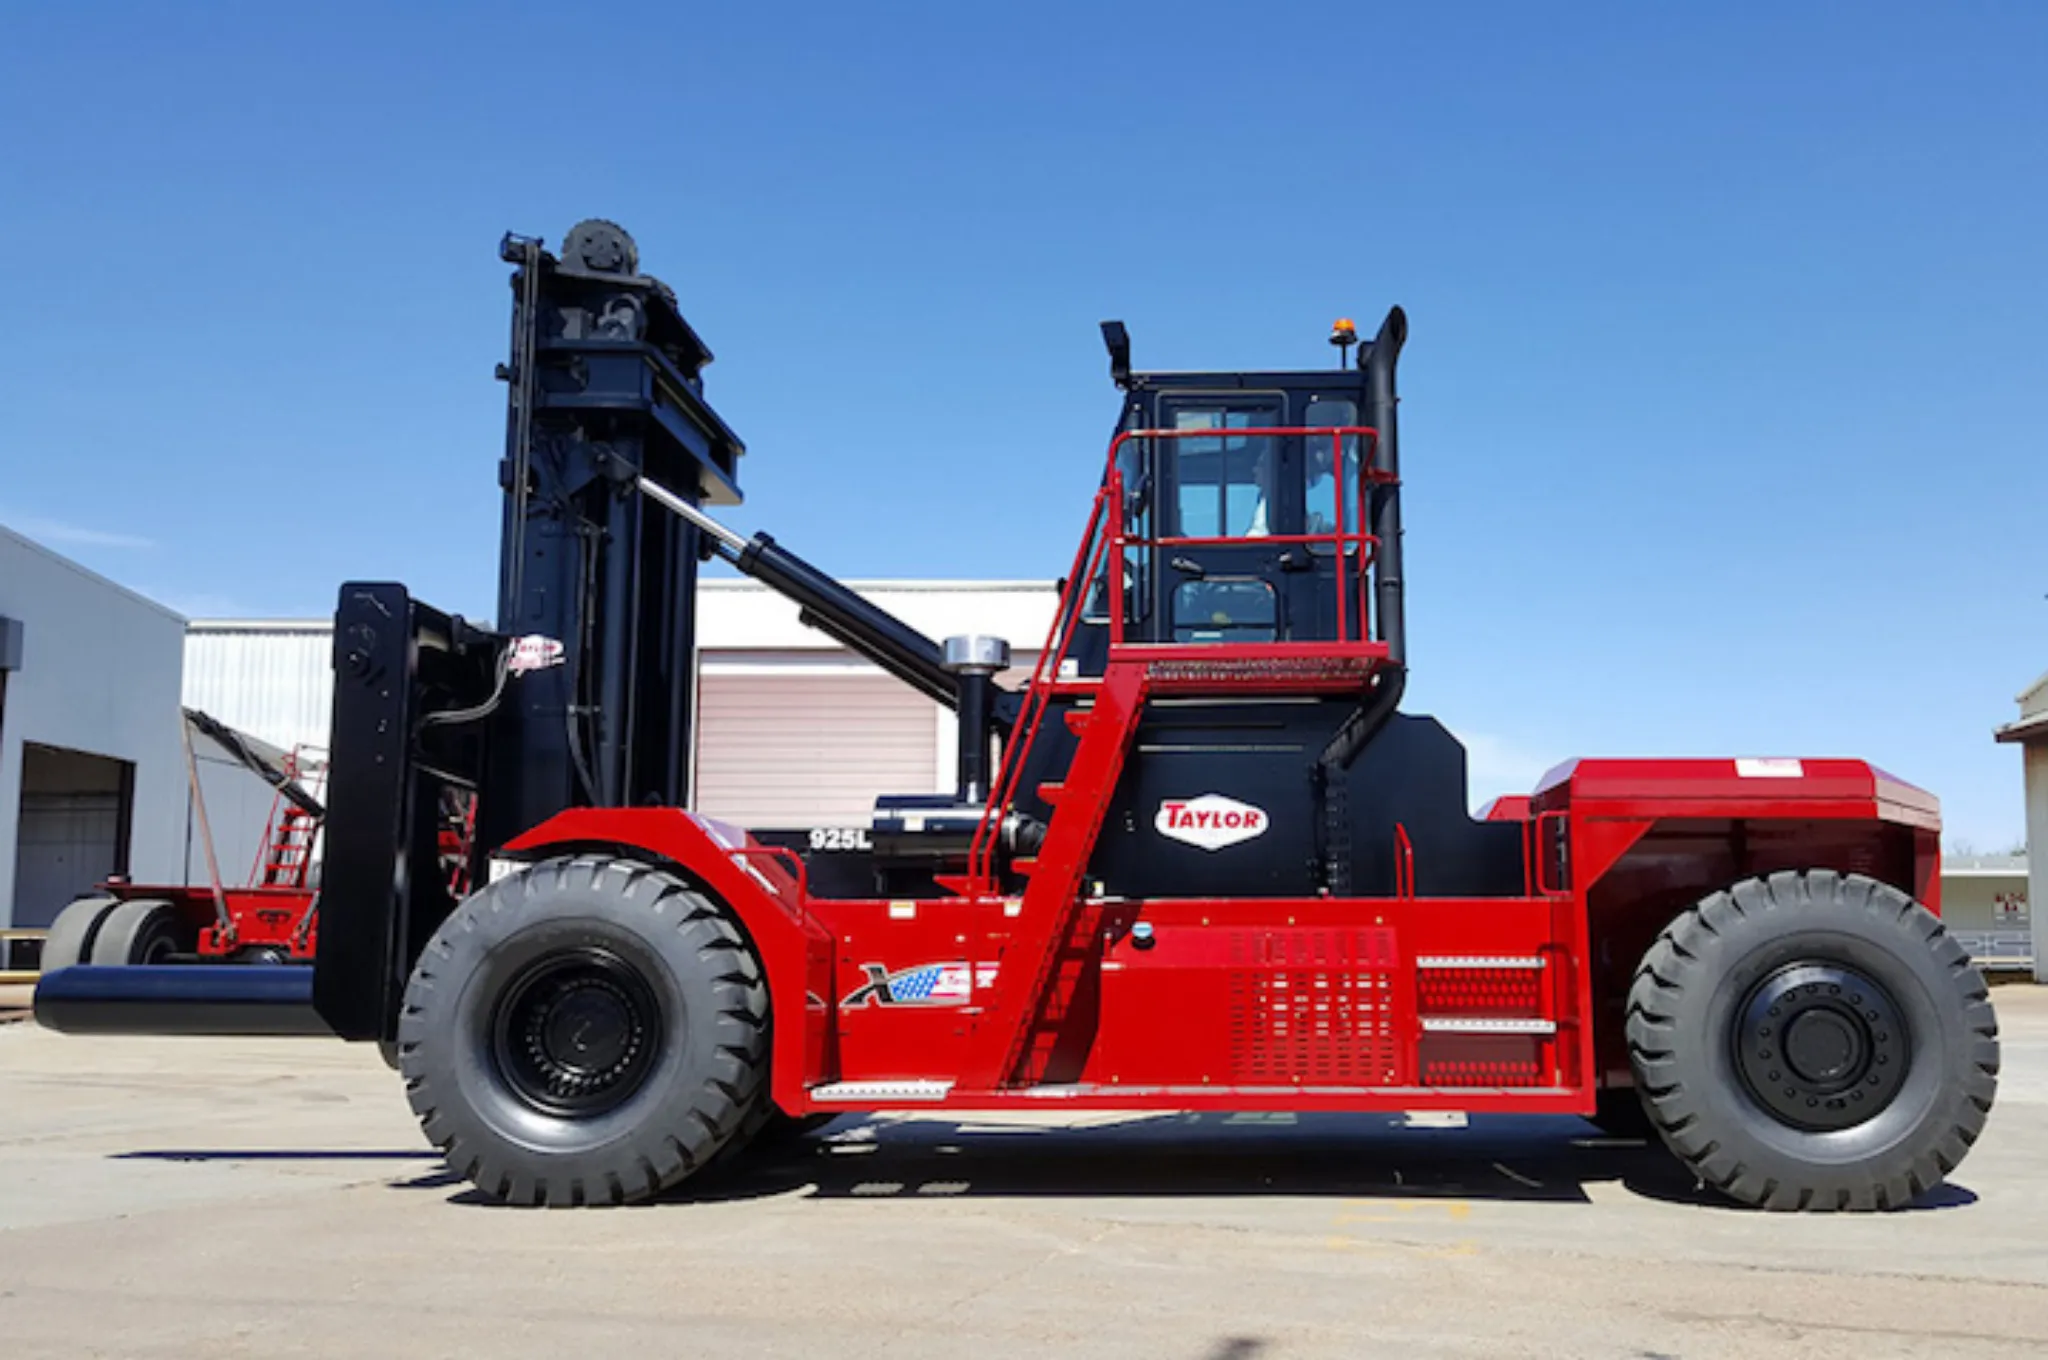 Taylor X-800L High Capacity Forklift